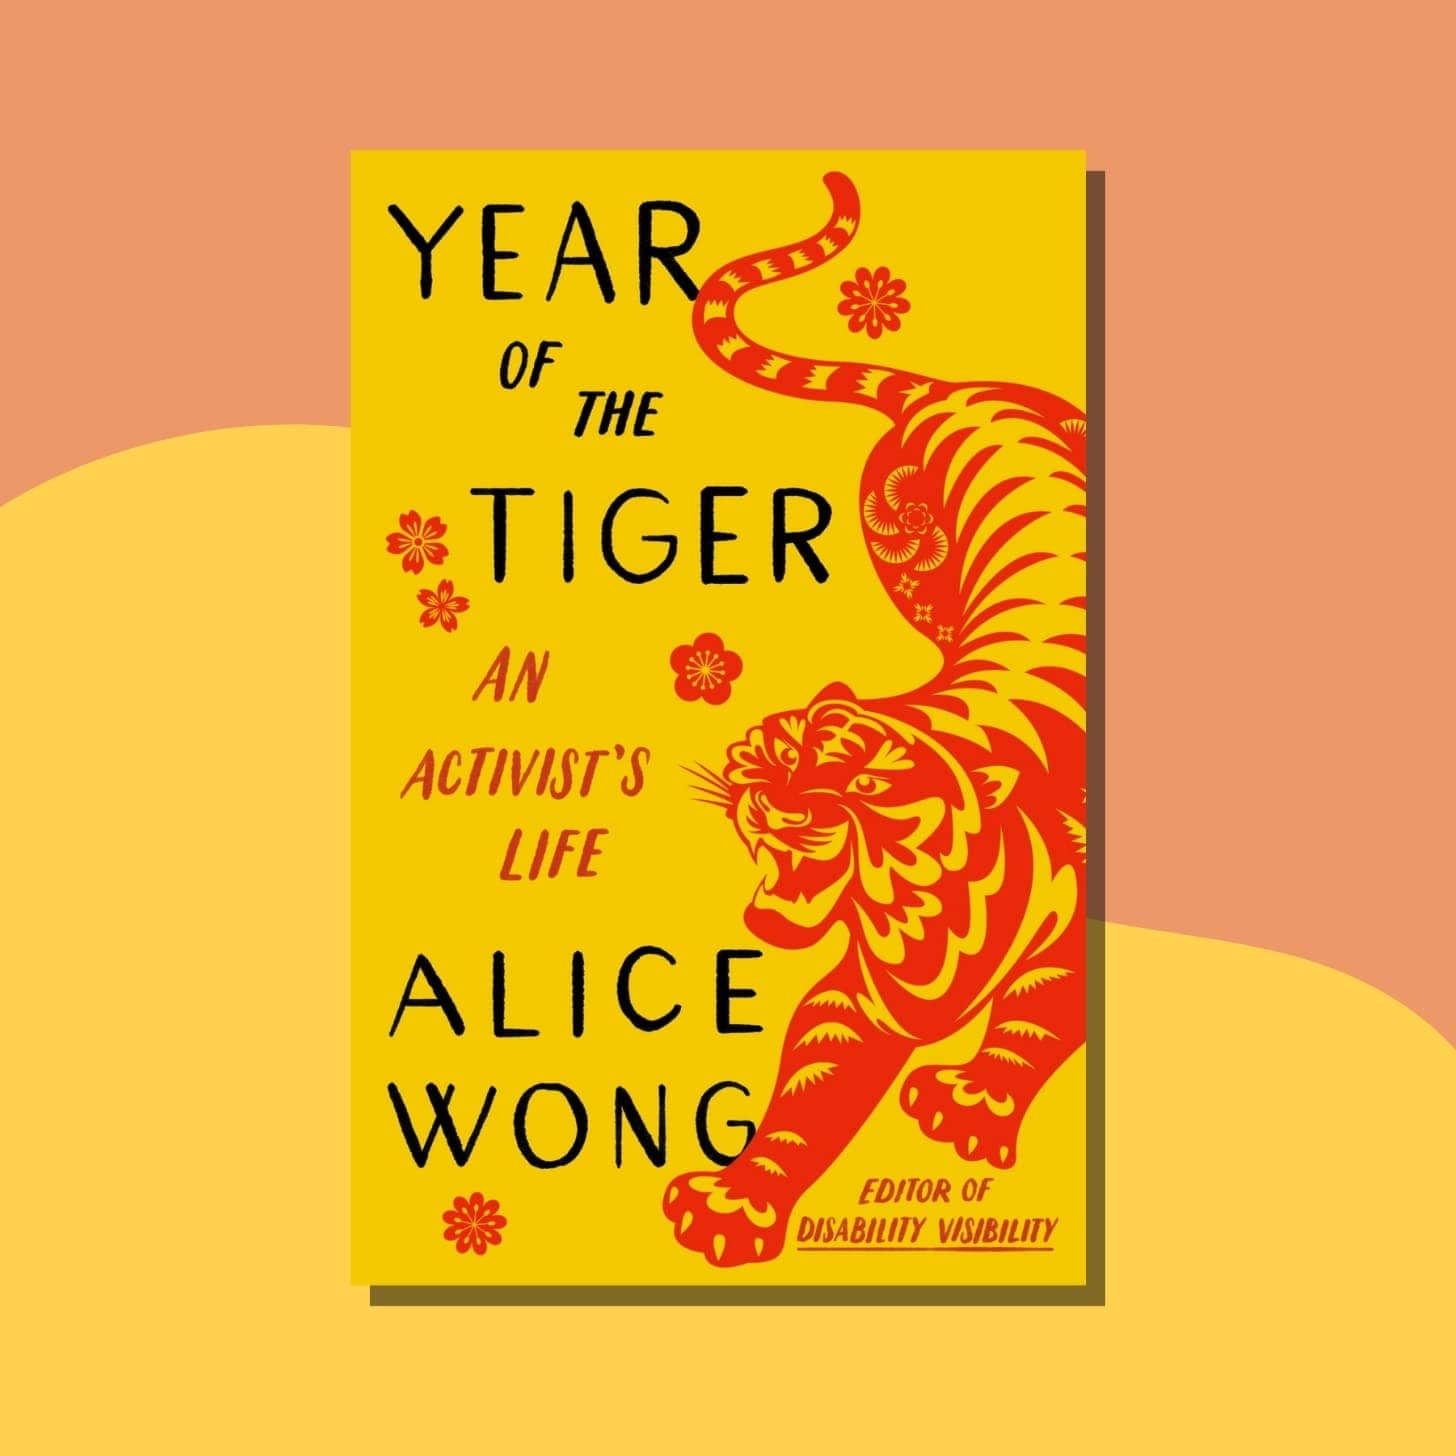 “Year of the Tiger: An Activist’s Life” by Alice Wong - cover is yellow with a red illustrated tiger